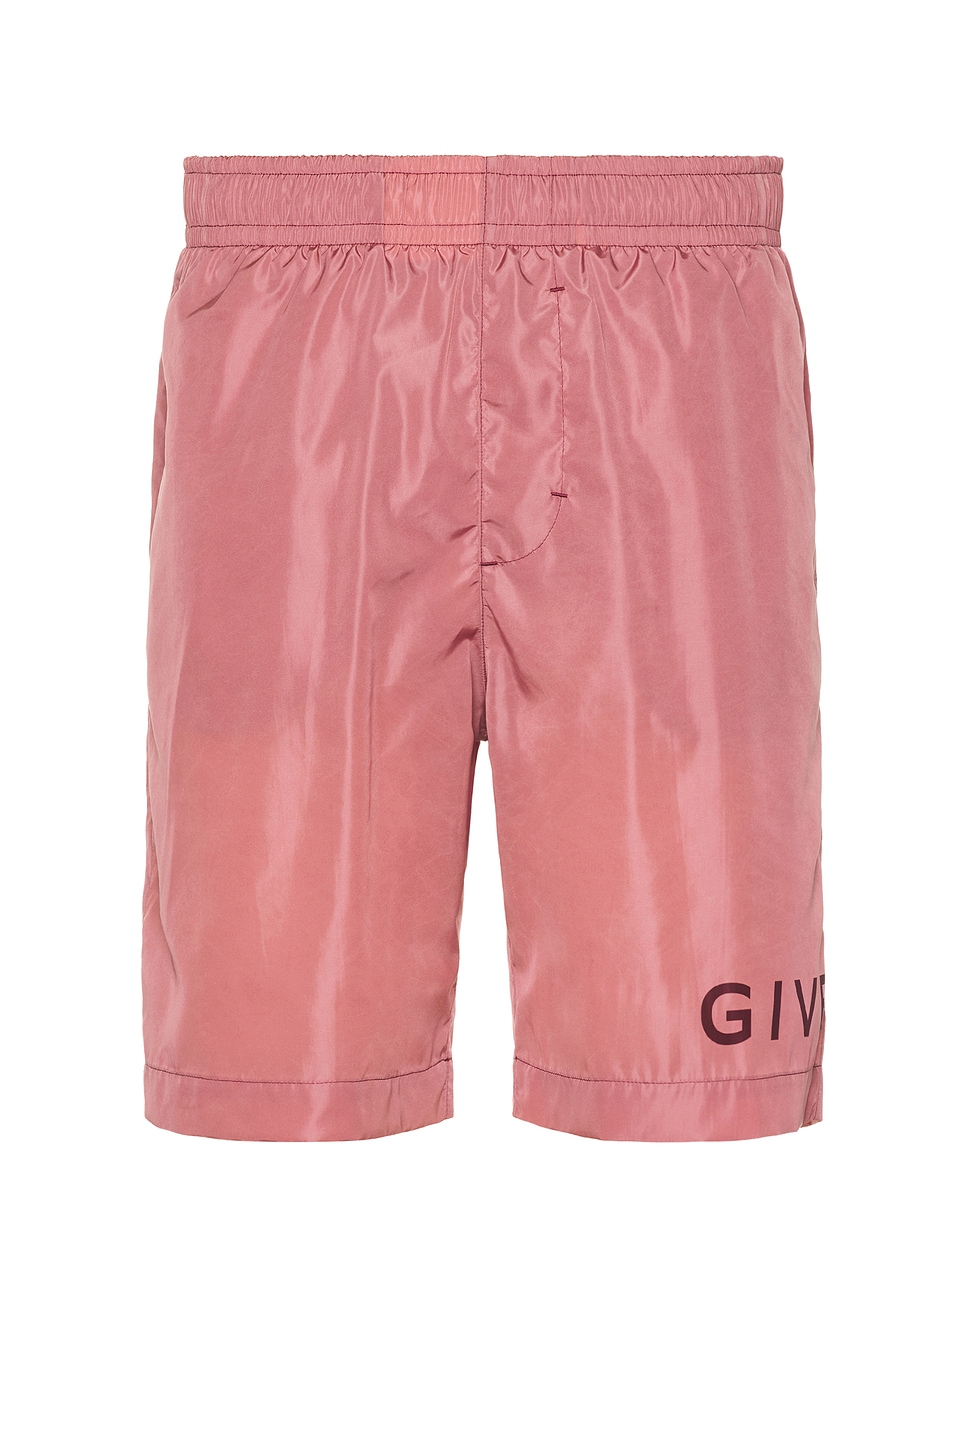 Image 1 of Givenchy Long Swimshorts in Old Pink